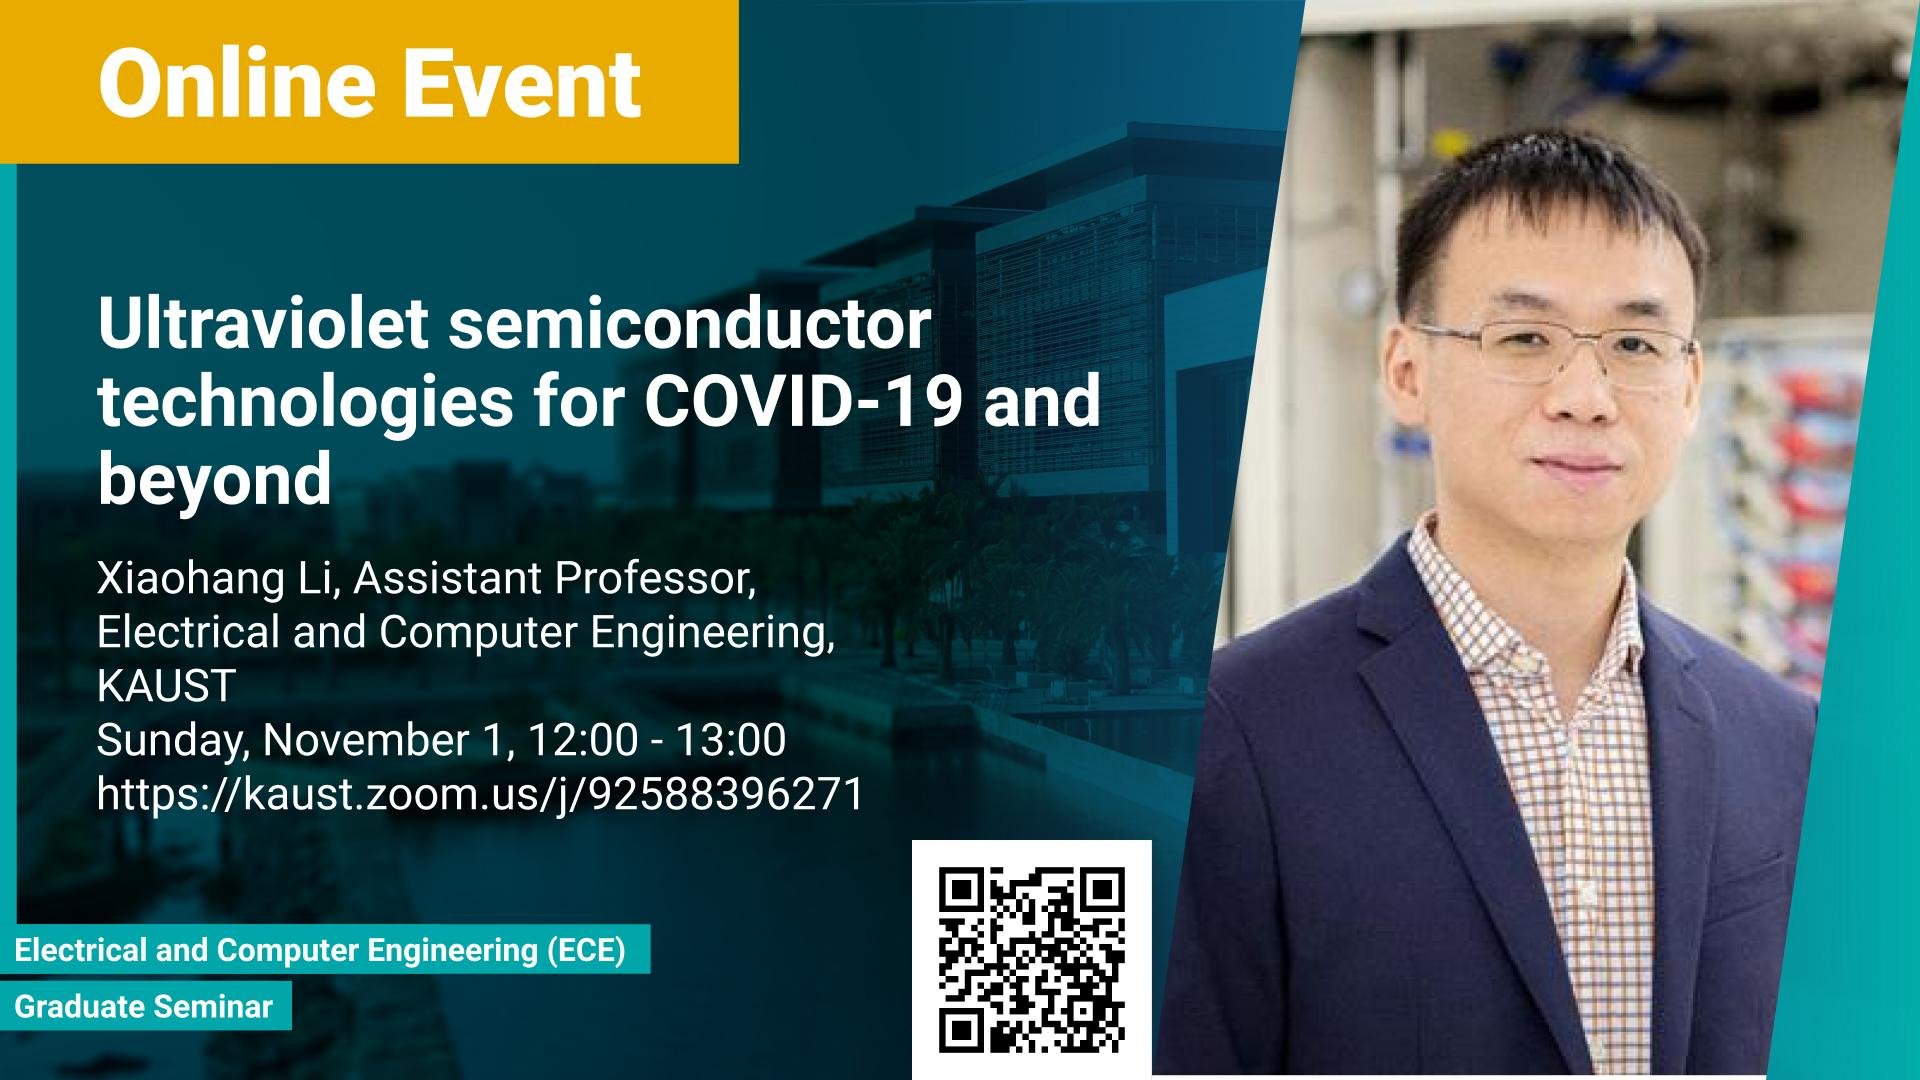 KAUST-CEMSE-ECE-Ultraviolet semiconductor technologies for COVID-19 and beyond.png